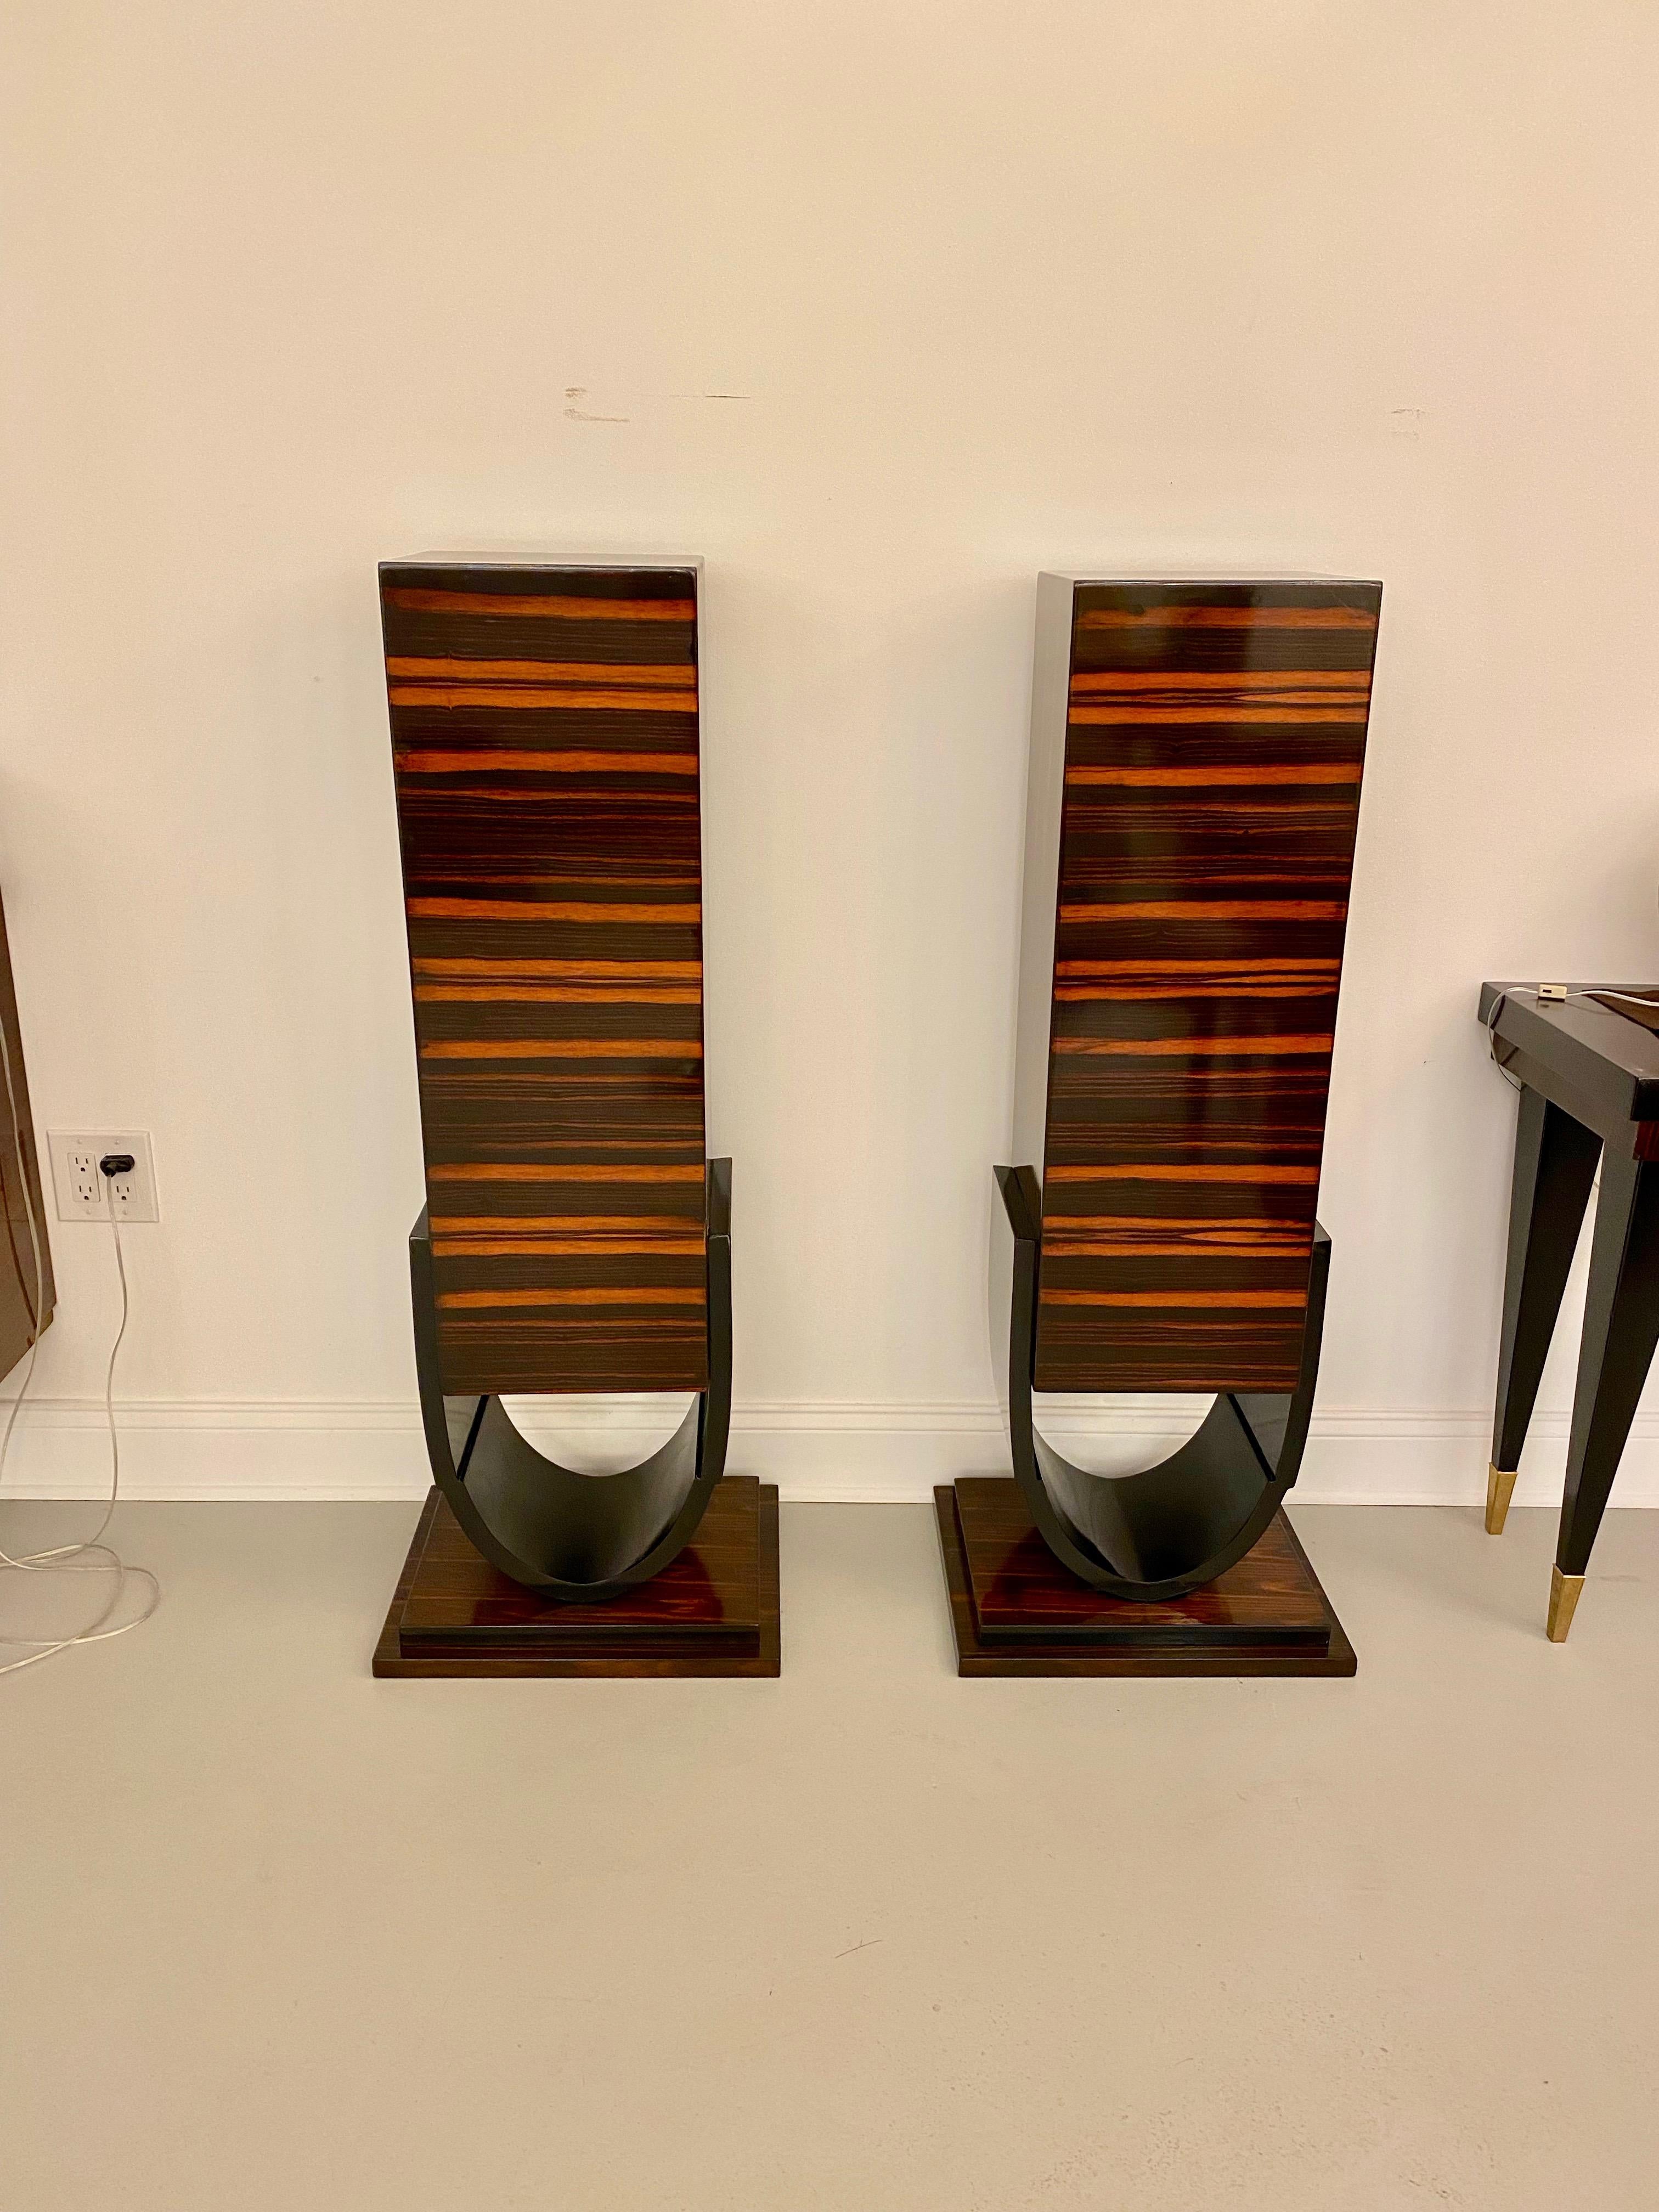 A spectacular pair of French Art Deco Macassar ebony pedestals, circa 1920s. Black lacquer tulip form base. These pedestals are Macassar ebony on all sides and can be shown anywhere in a room. They can be viewed from all sides. High gloss finish.